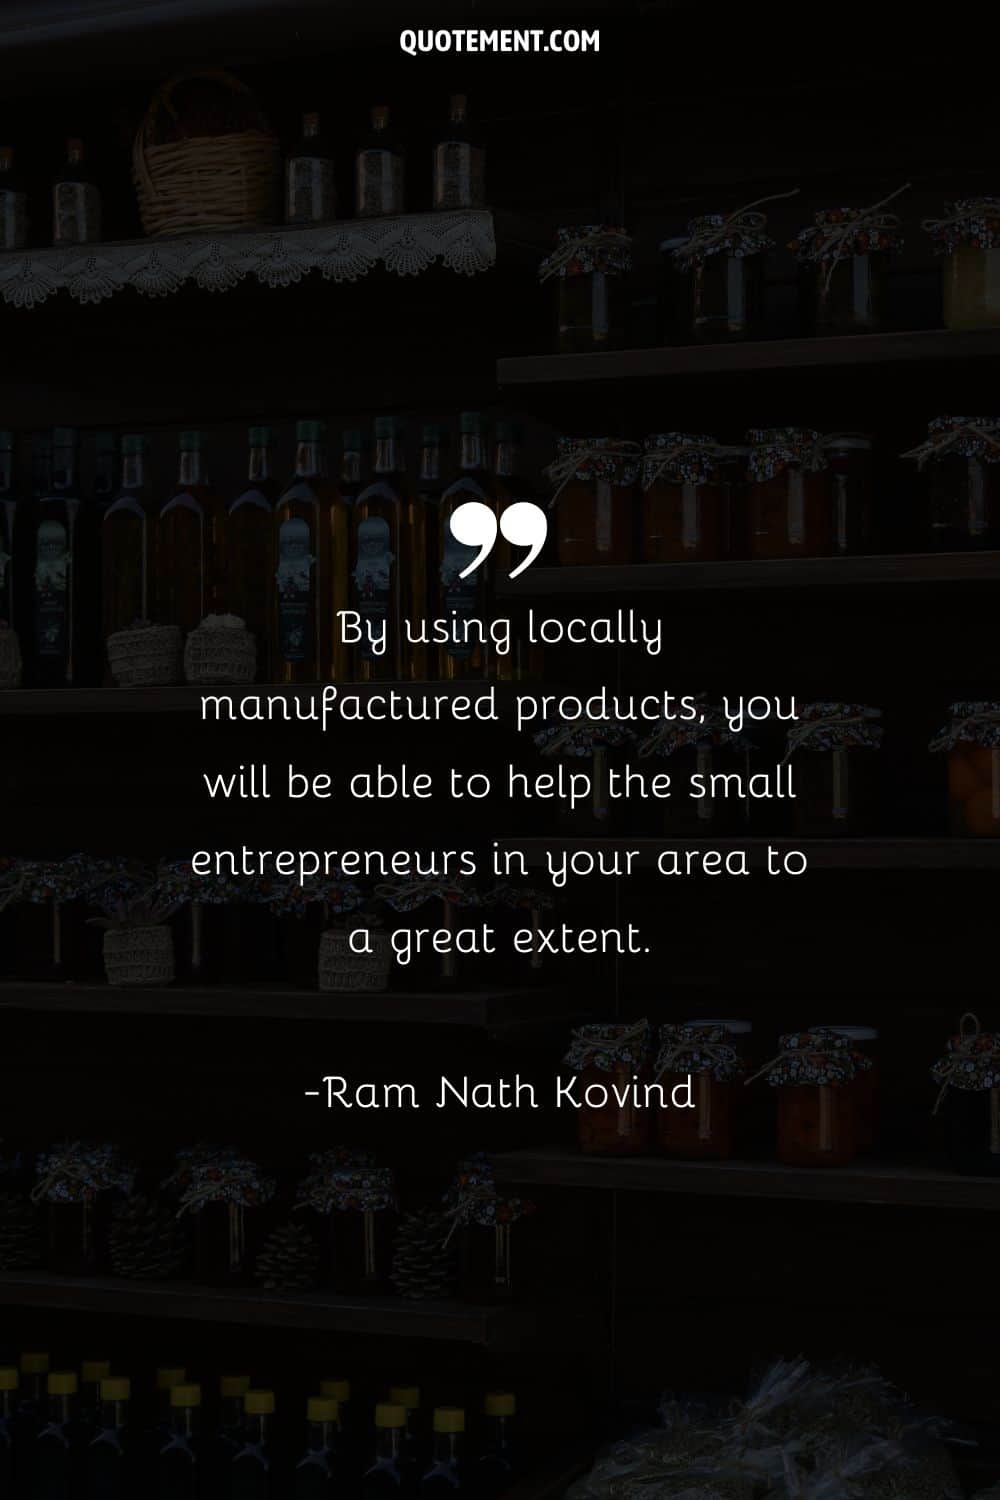 By using locally manufactured products, you will be able to help the small entrepreneurs in your area to a great extent.